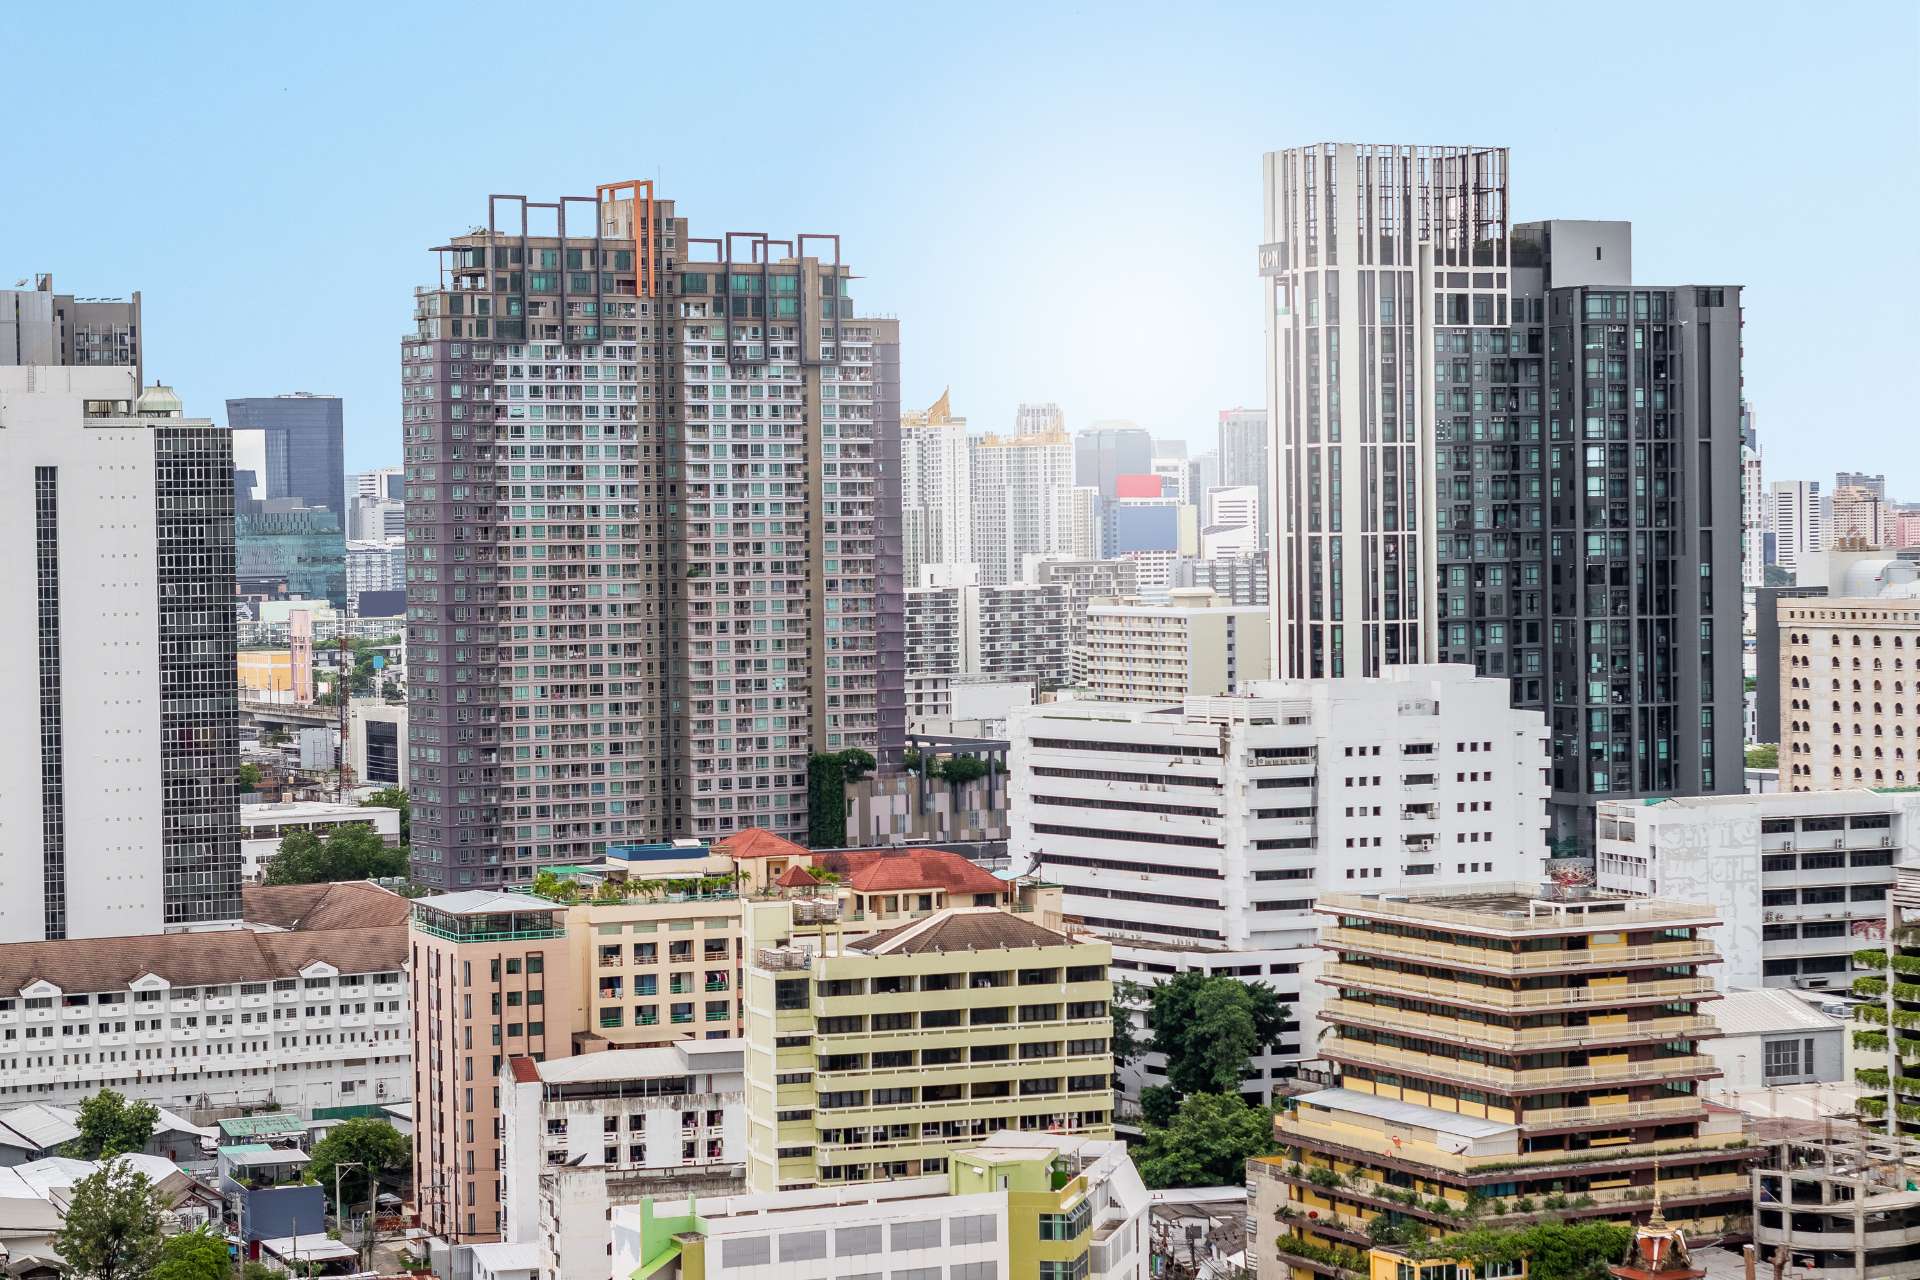 Bangkok Residential Property A Prime Investment Opportunities